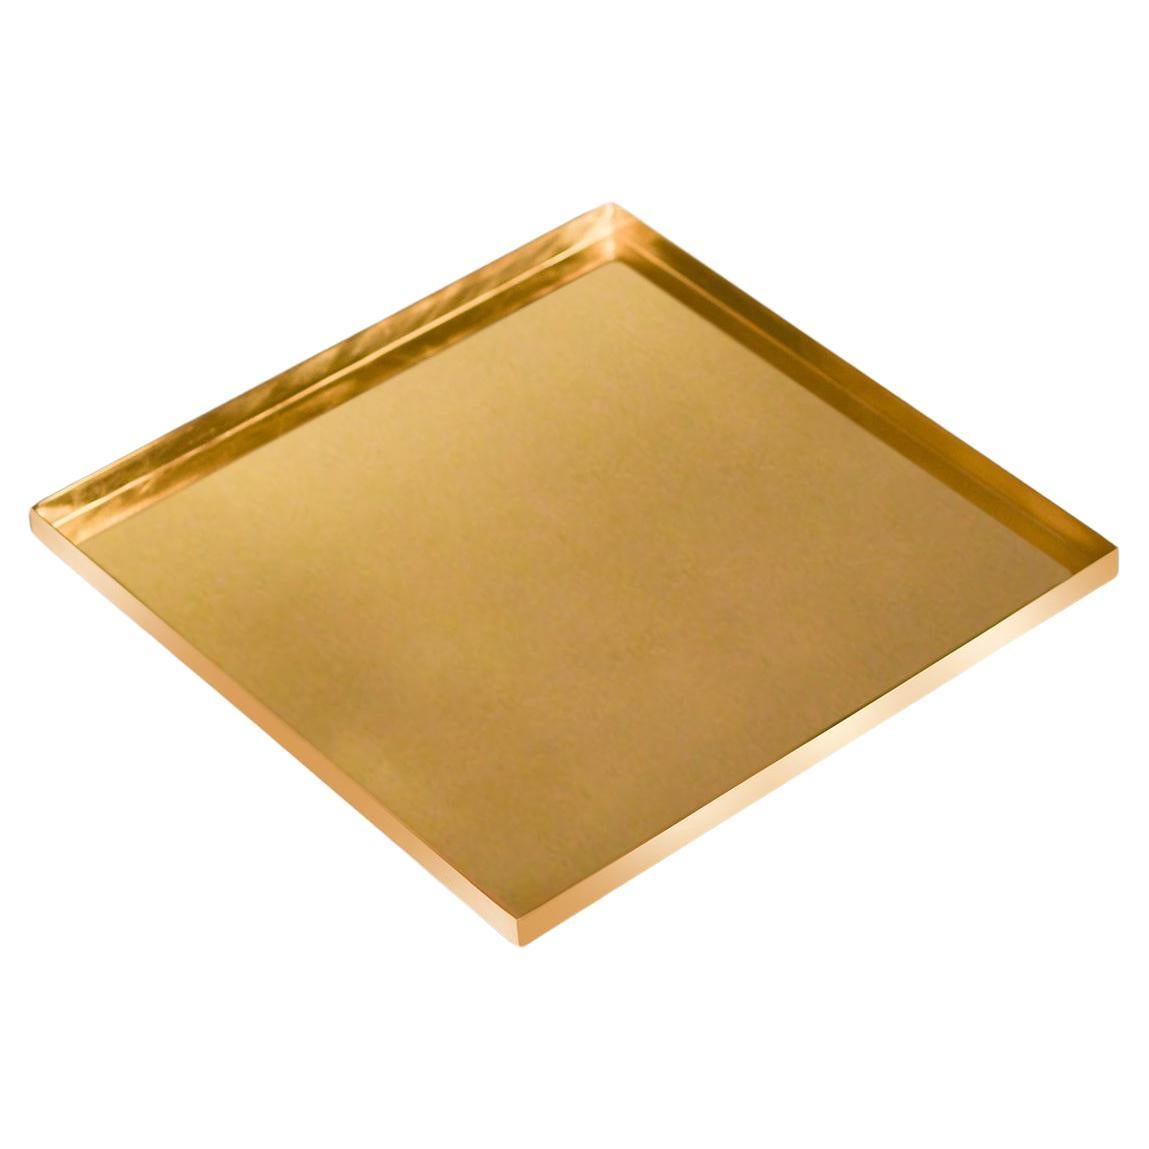 Brass trays “Molto Editions” For Sale